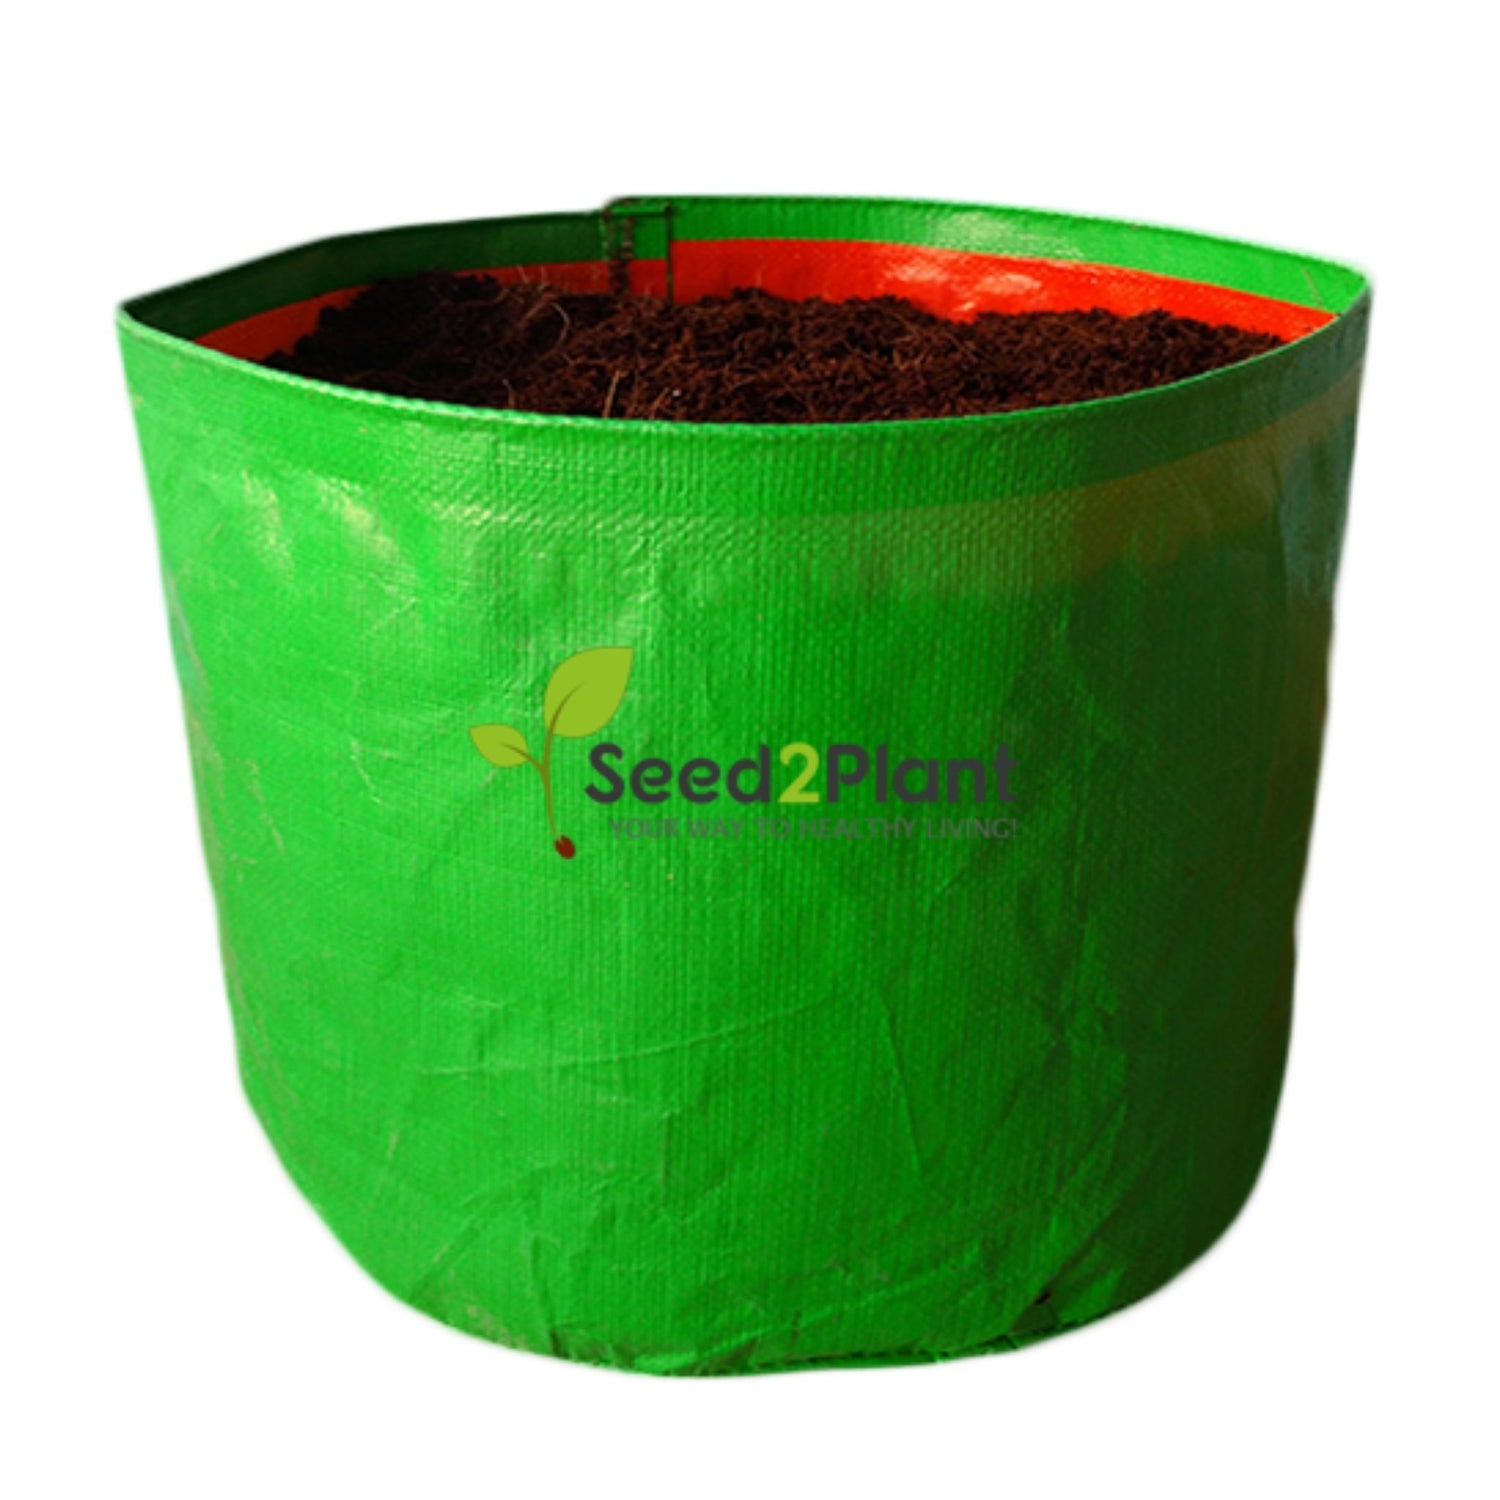 15x12 Inches (1¼x1 Ft) - 220 GSM HDPE Round Grow Bag